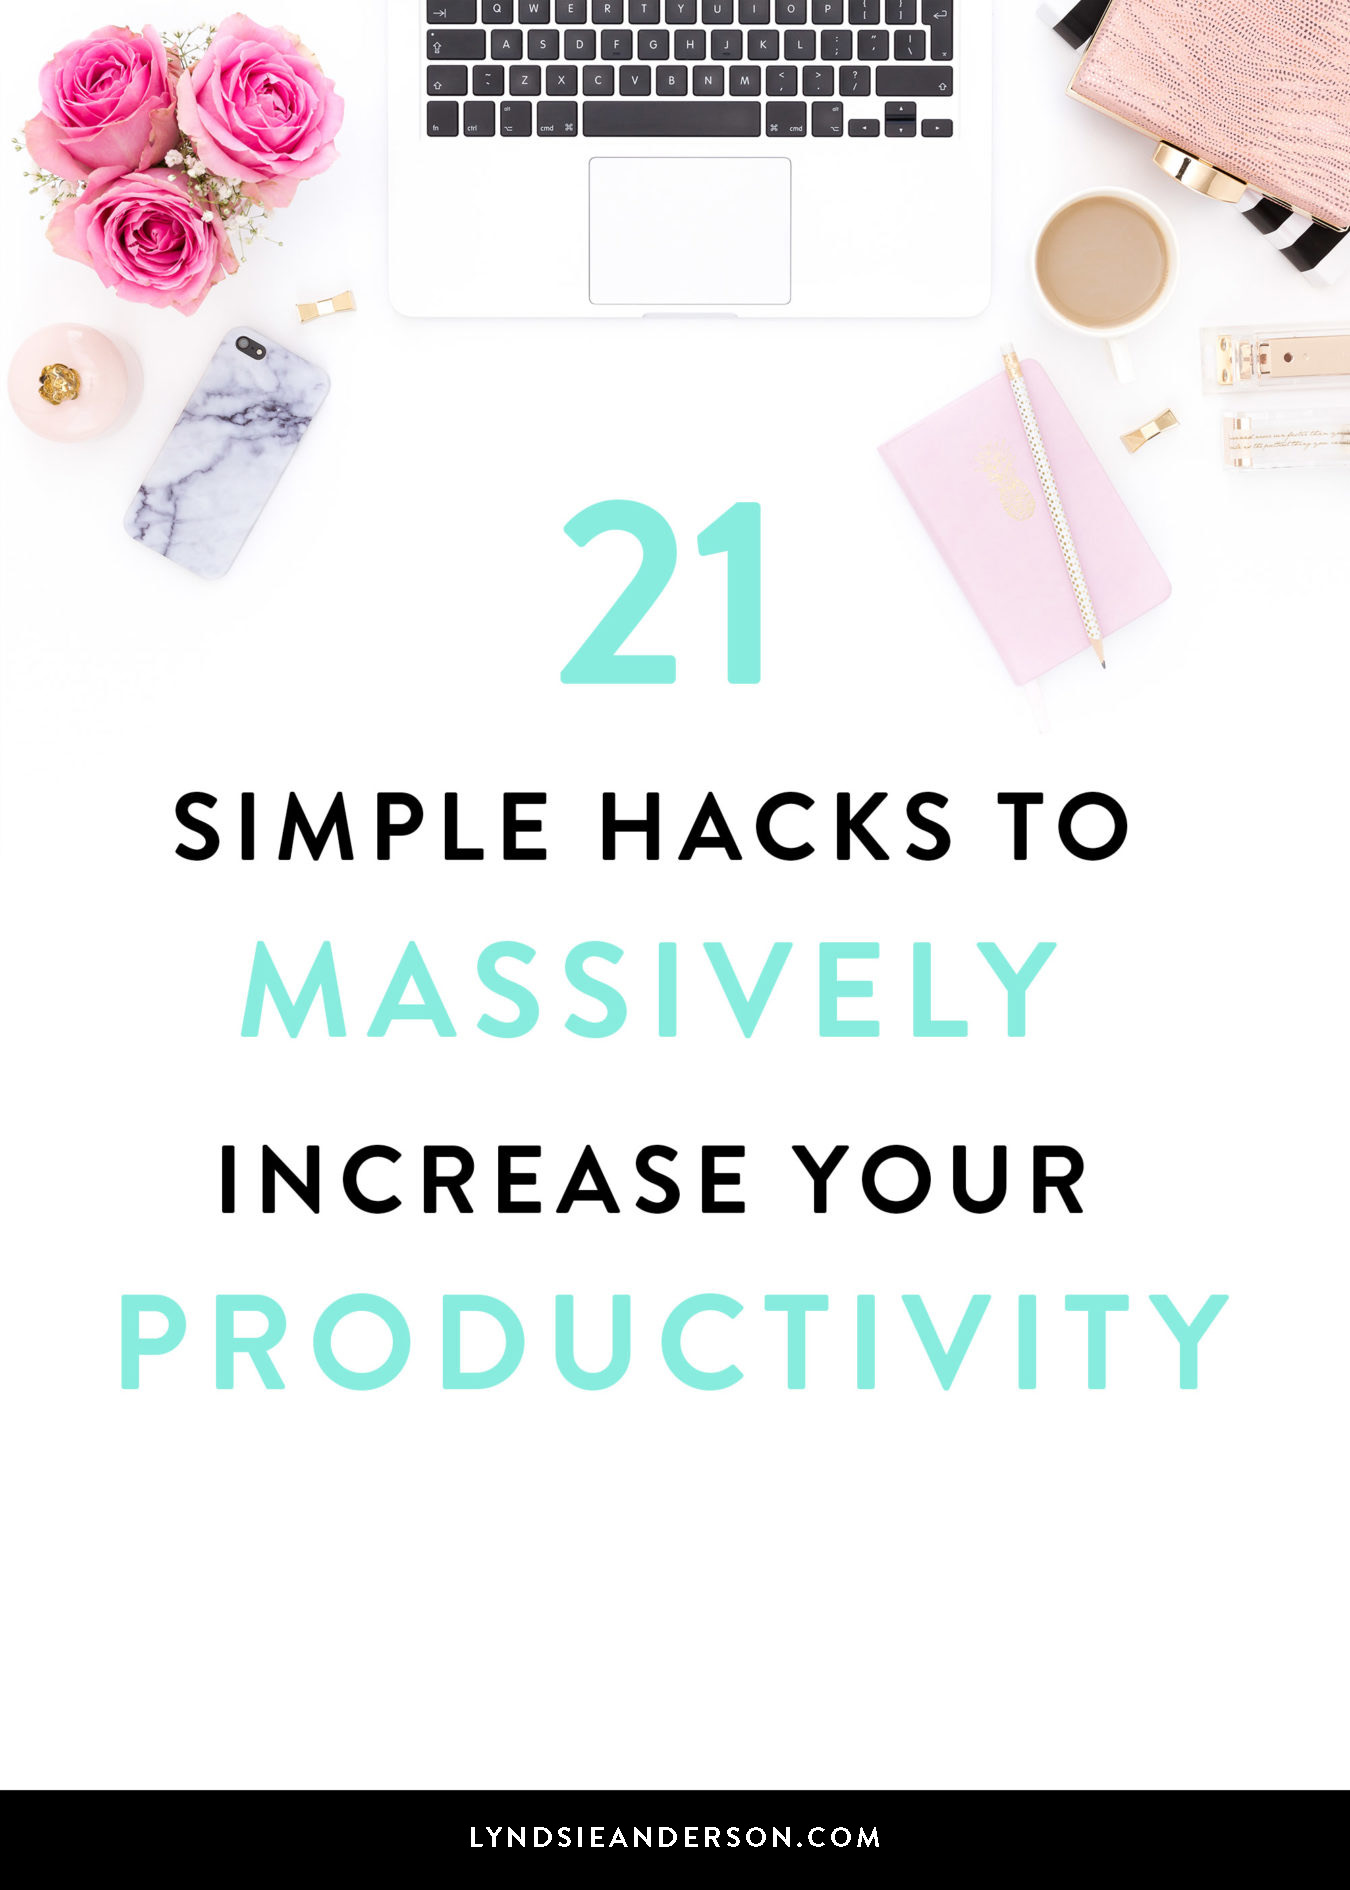 how to increase productivity